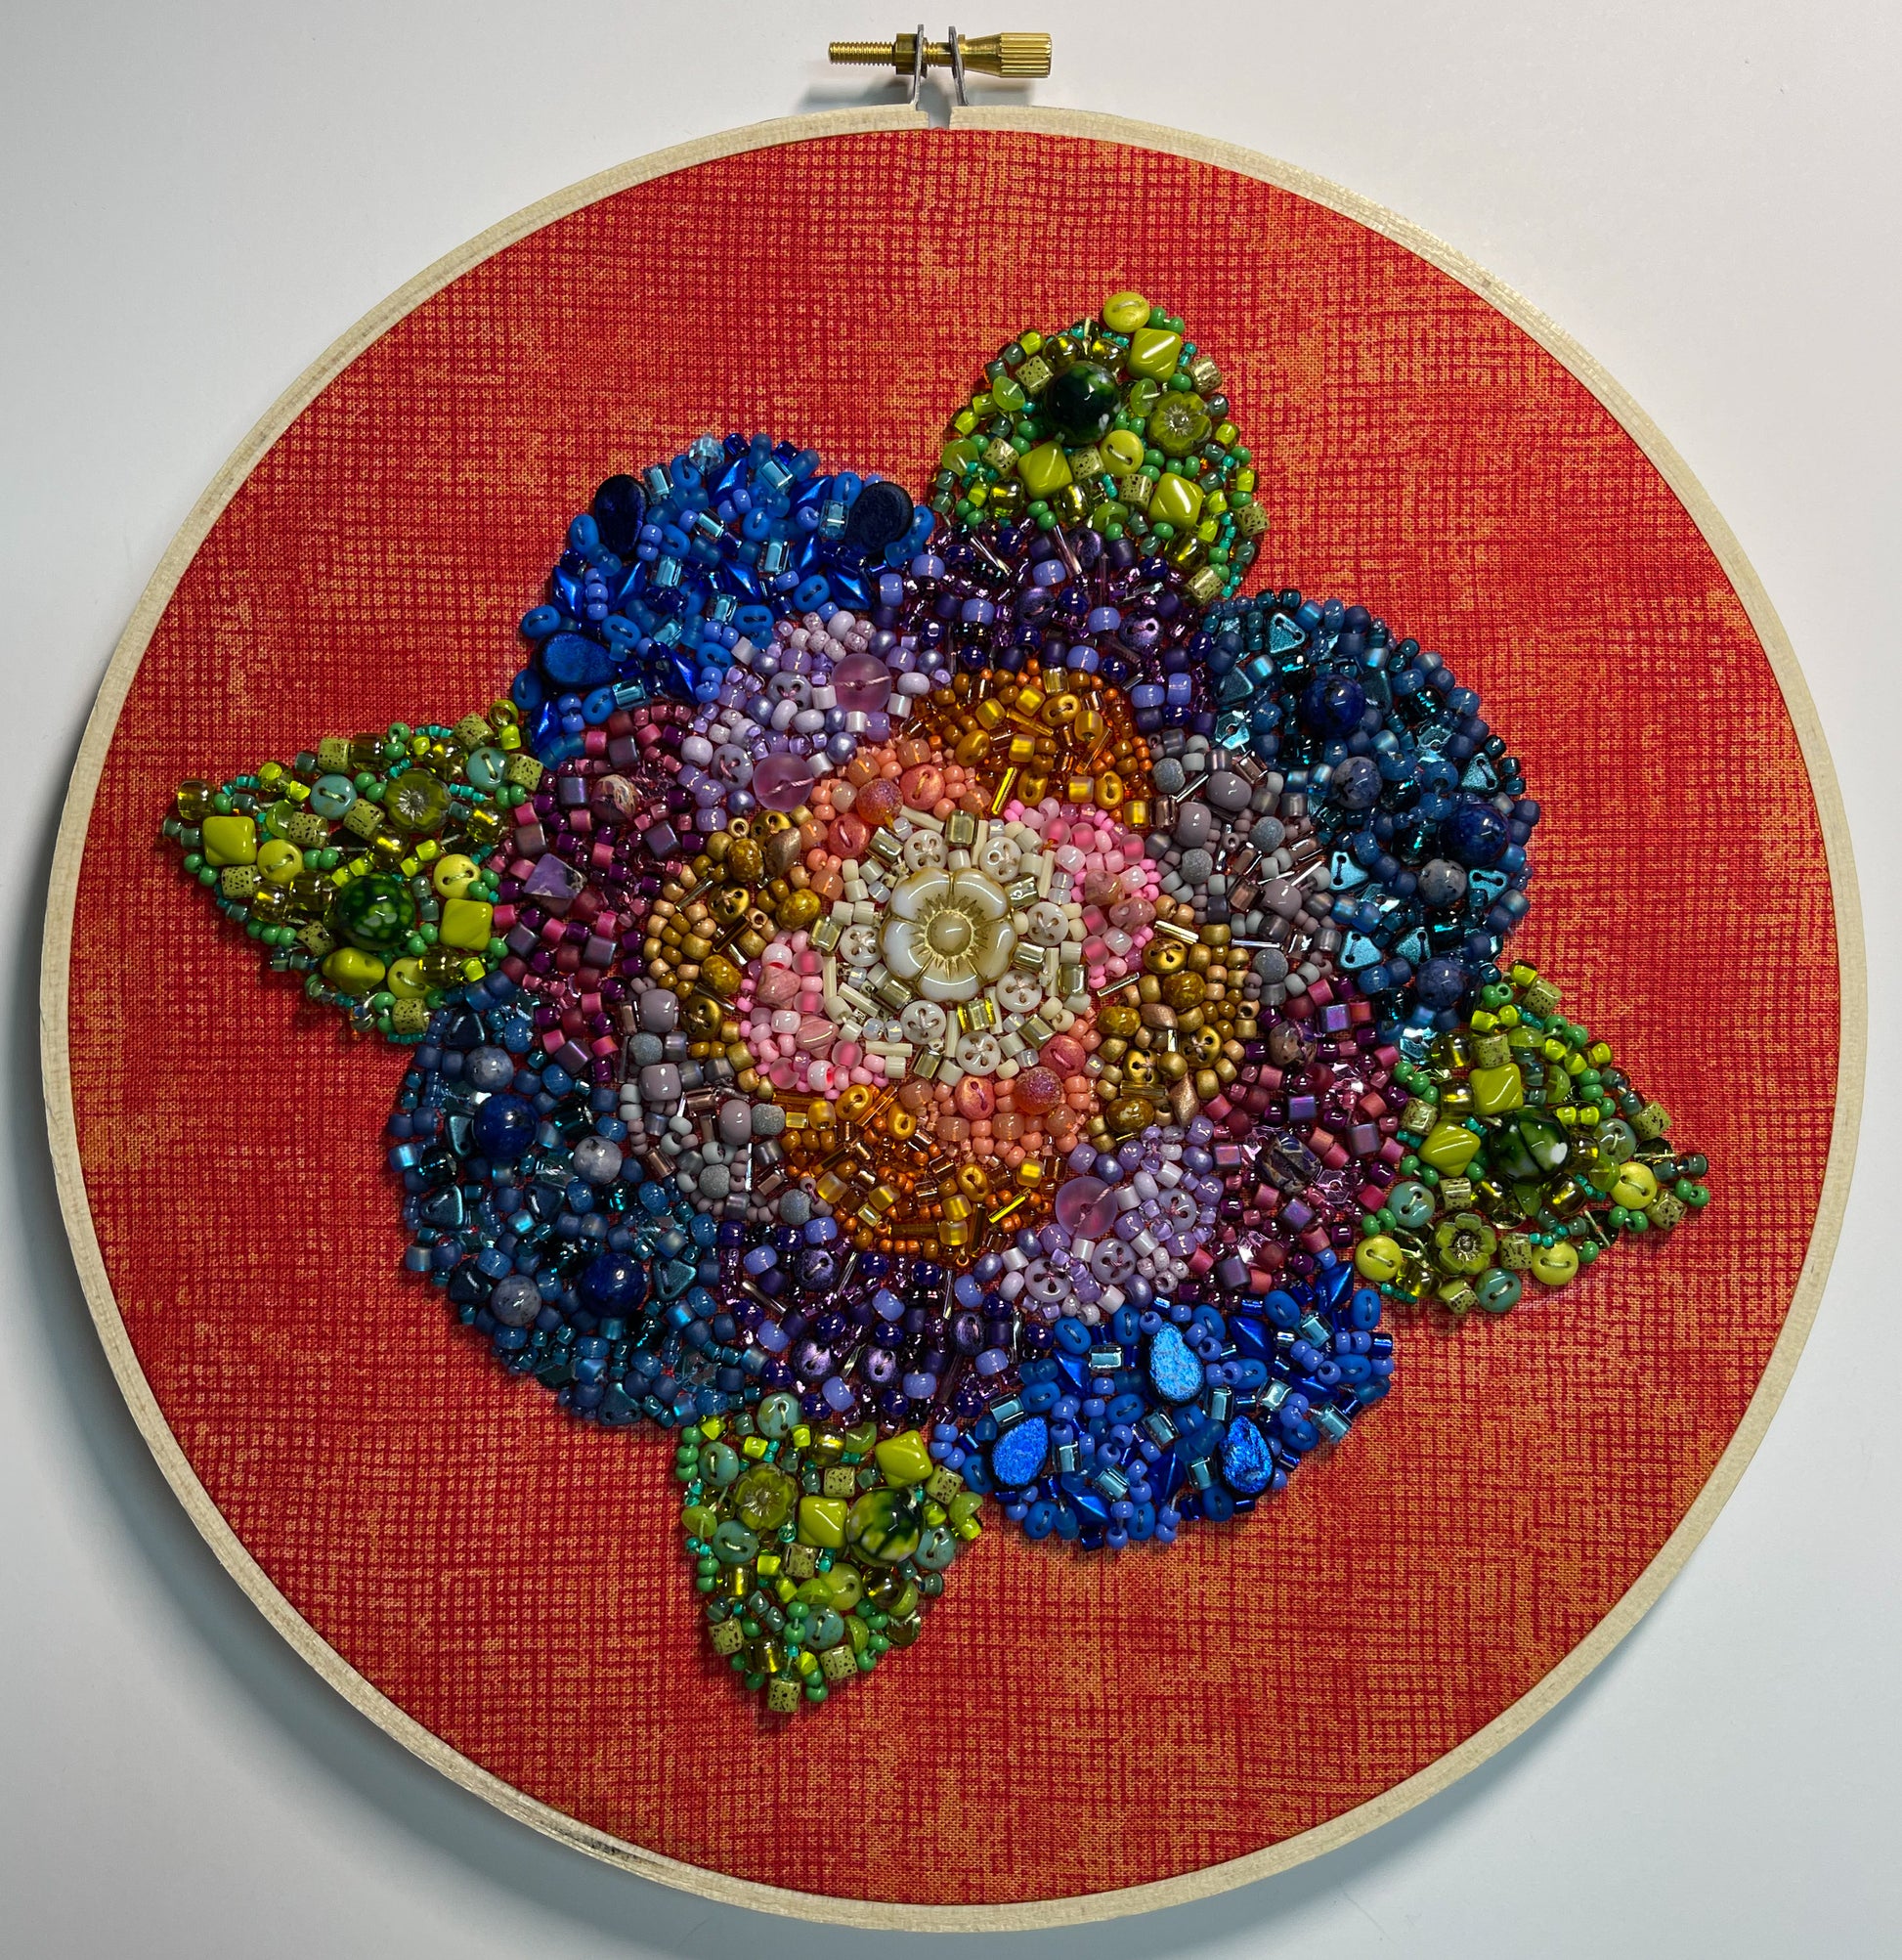 Finished this floral mixed media piece - Embroidery, Beads and Gouache on  handmade paper. What do you think? : r/Embroidery